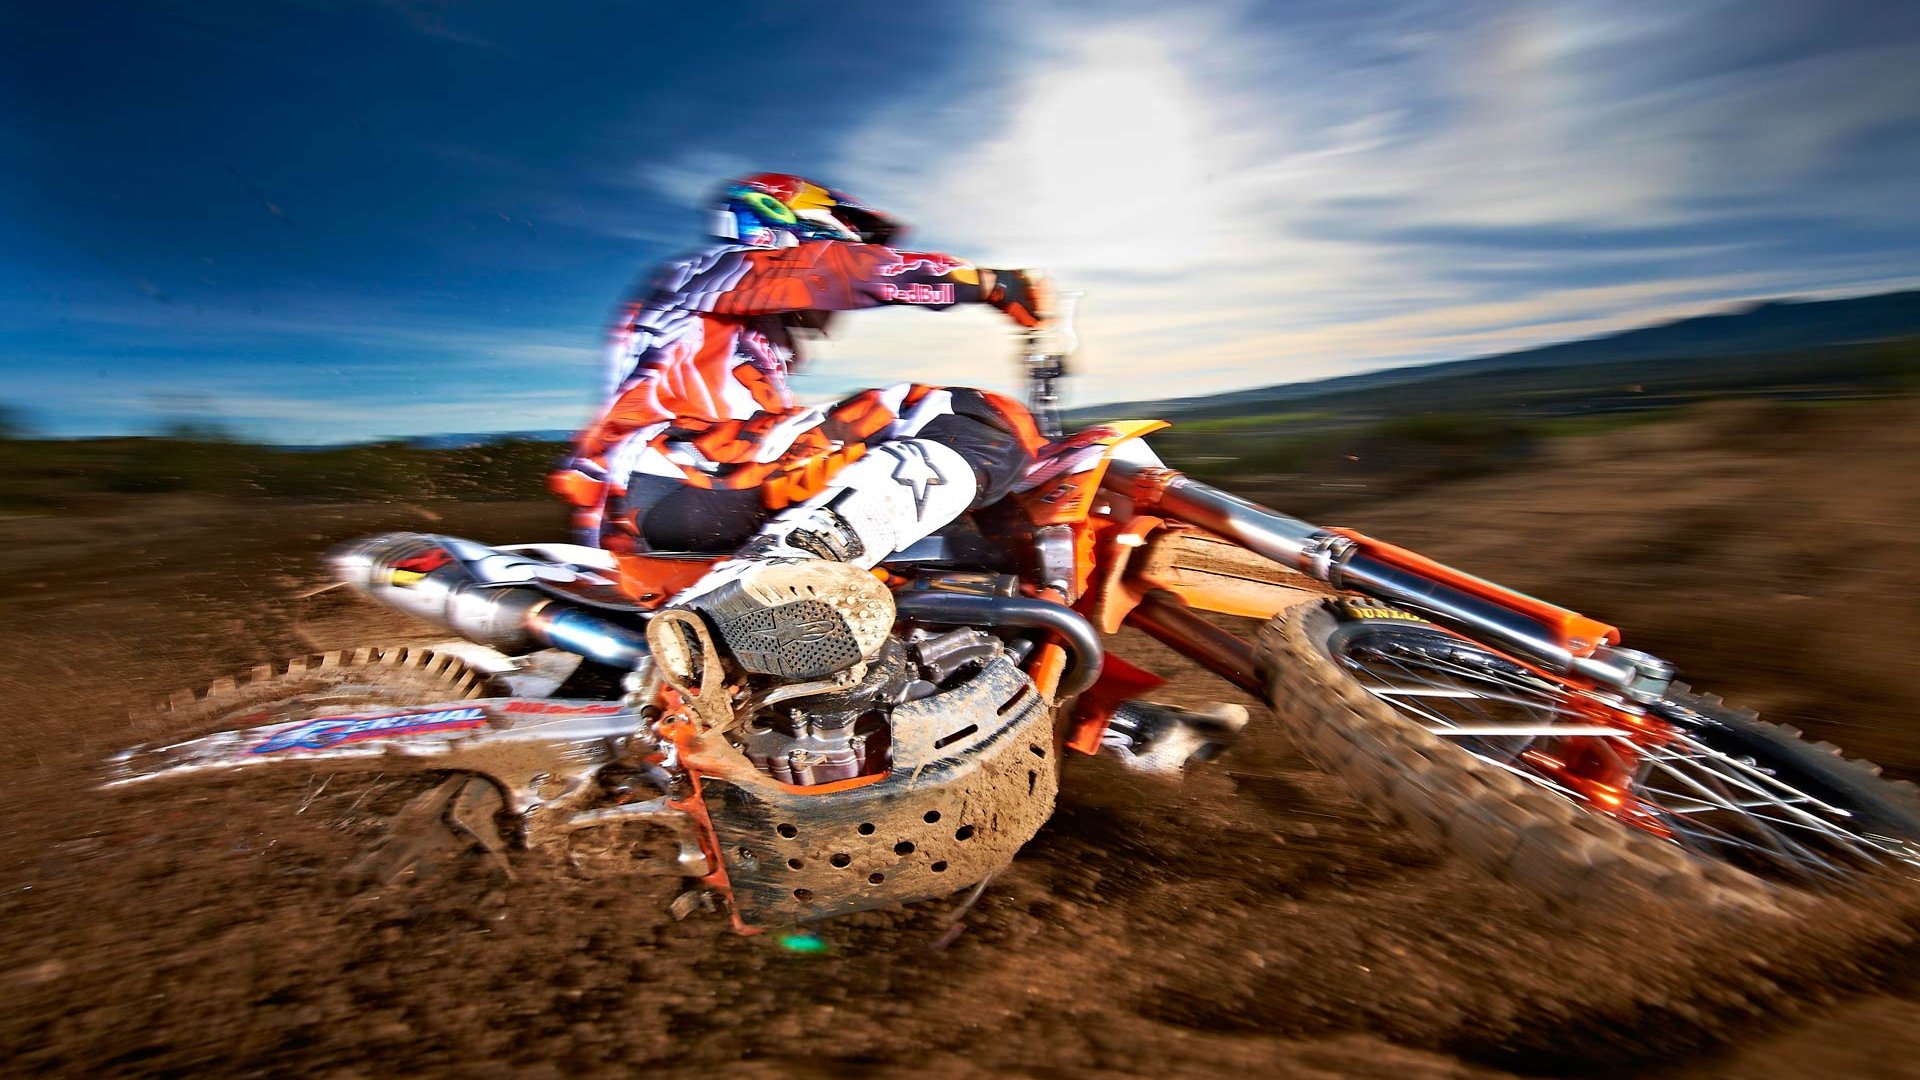 HD Motocross Wallpapers and Photos | HD Bikes Wallpapers